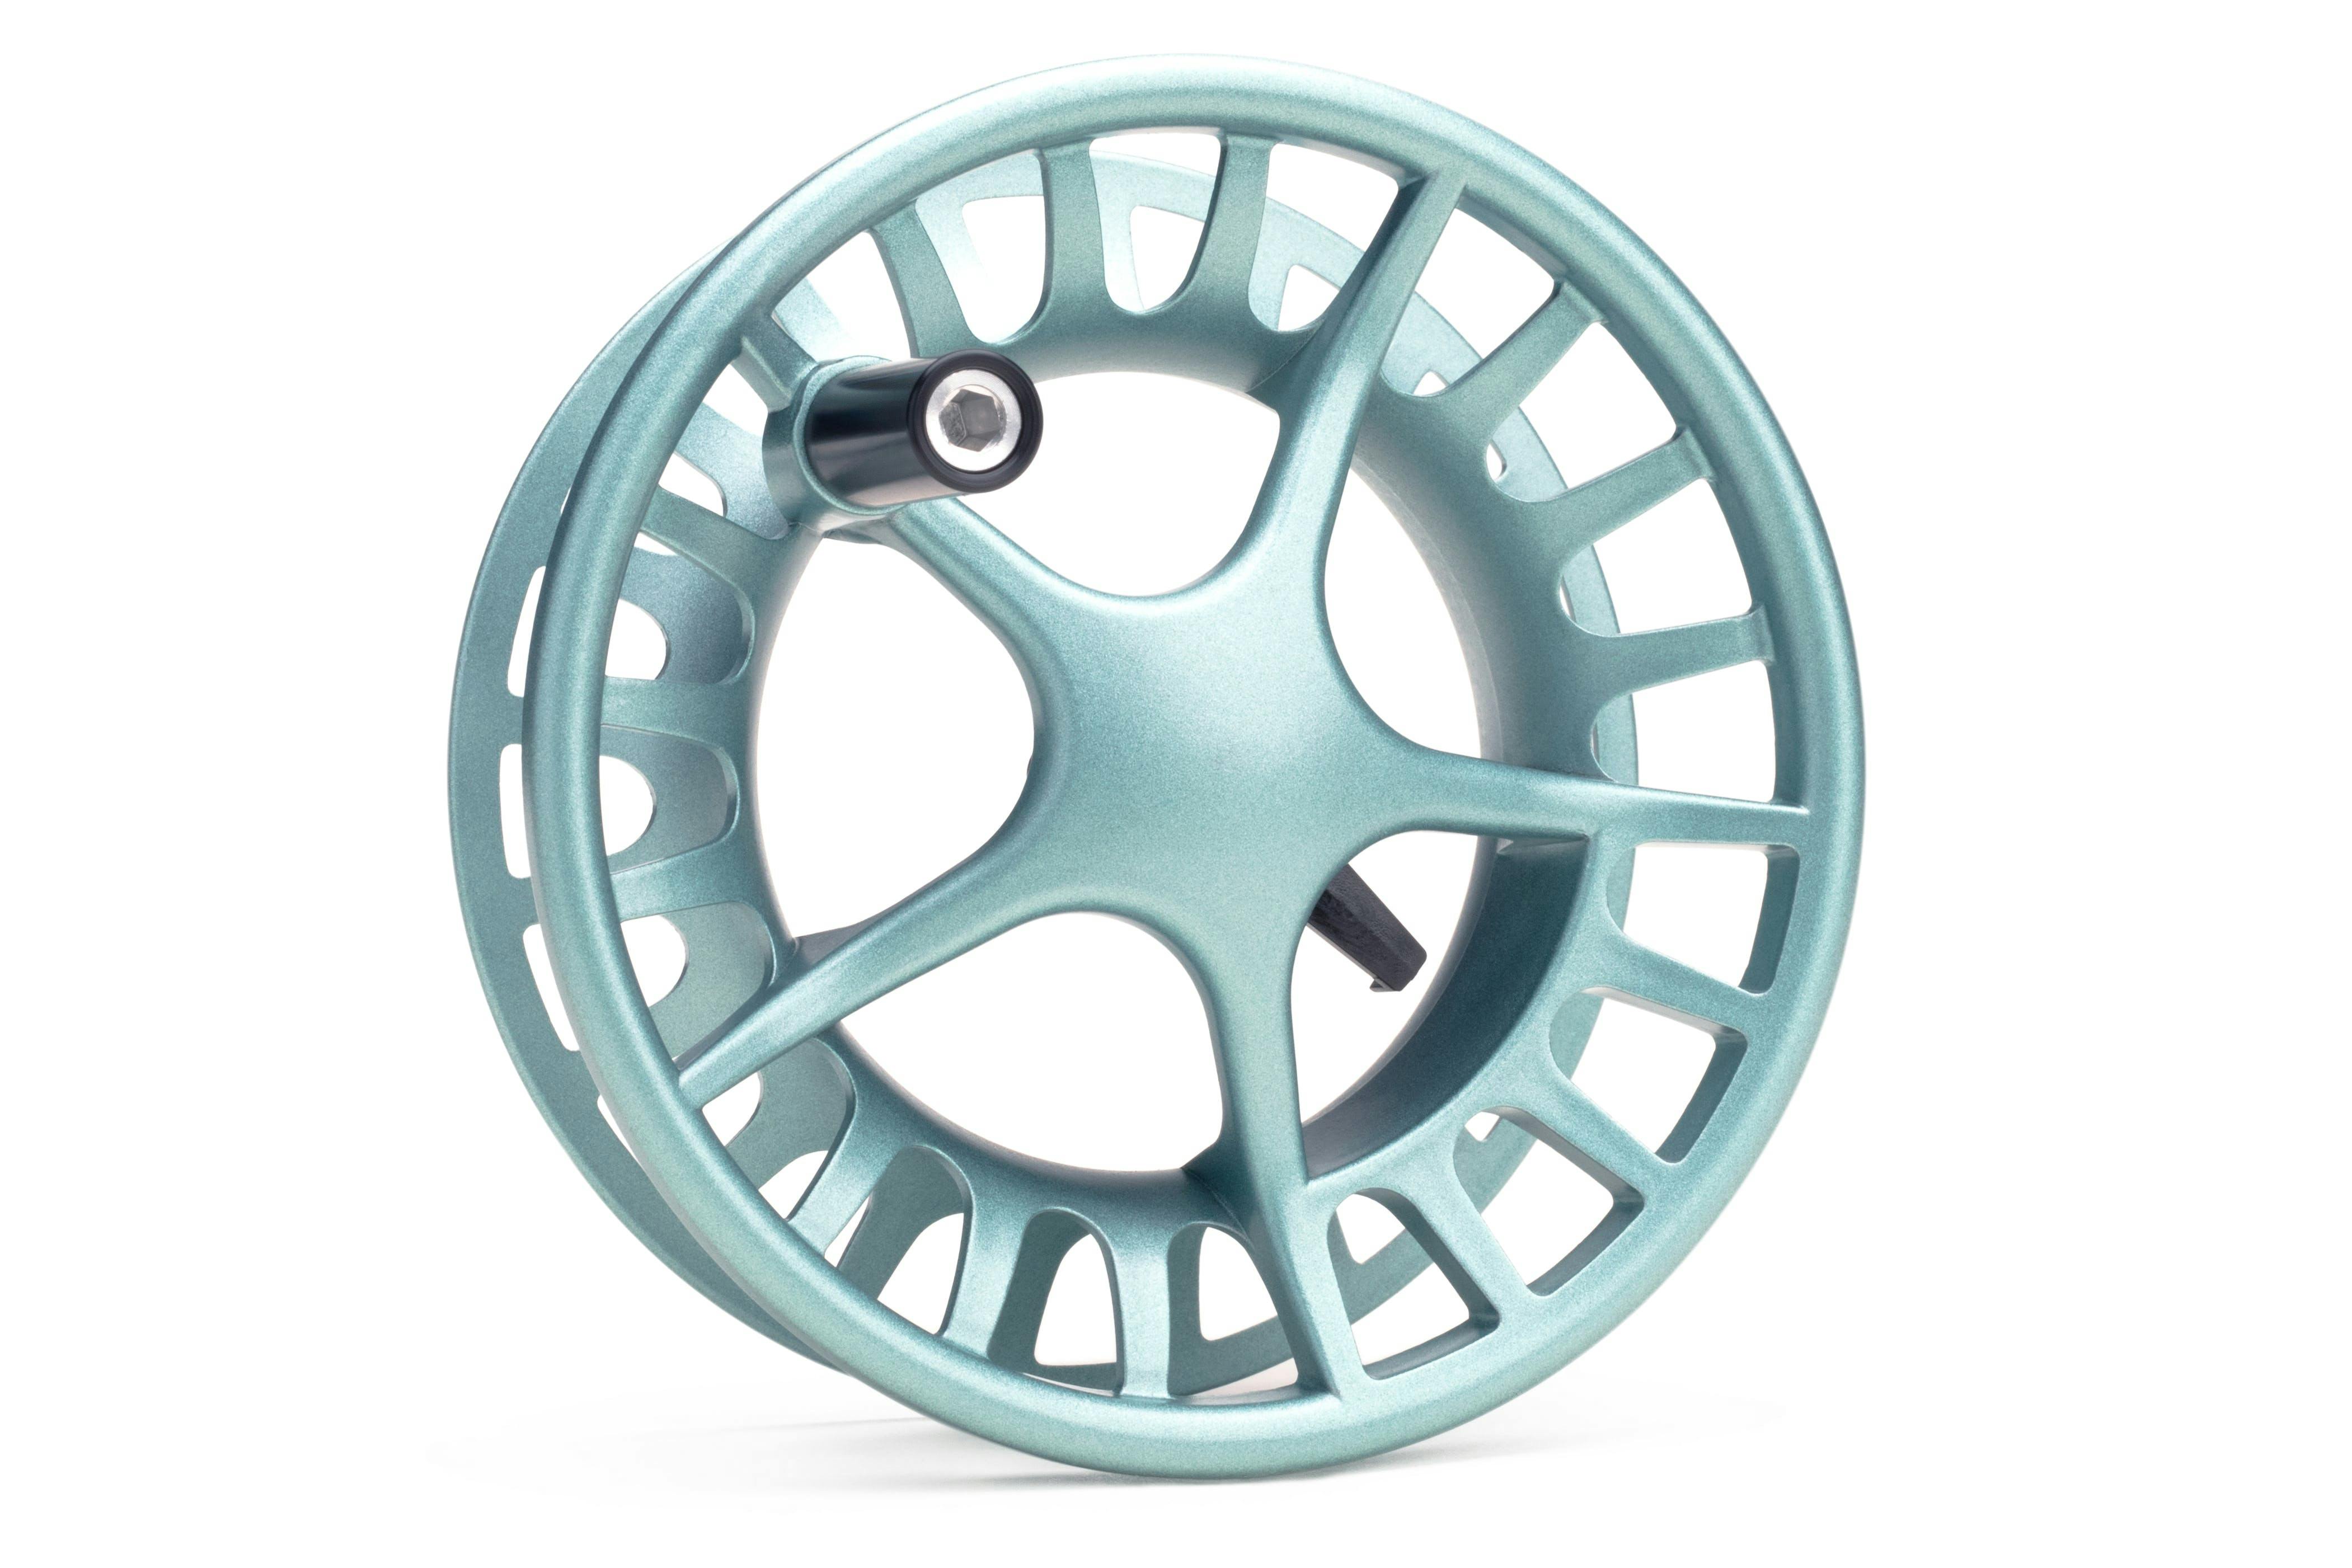 Lamson Remix 3 Pack Fly Reel and 2 Spare Spools · 7+ wt · Glacier